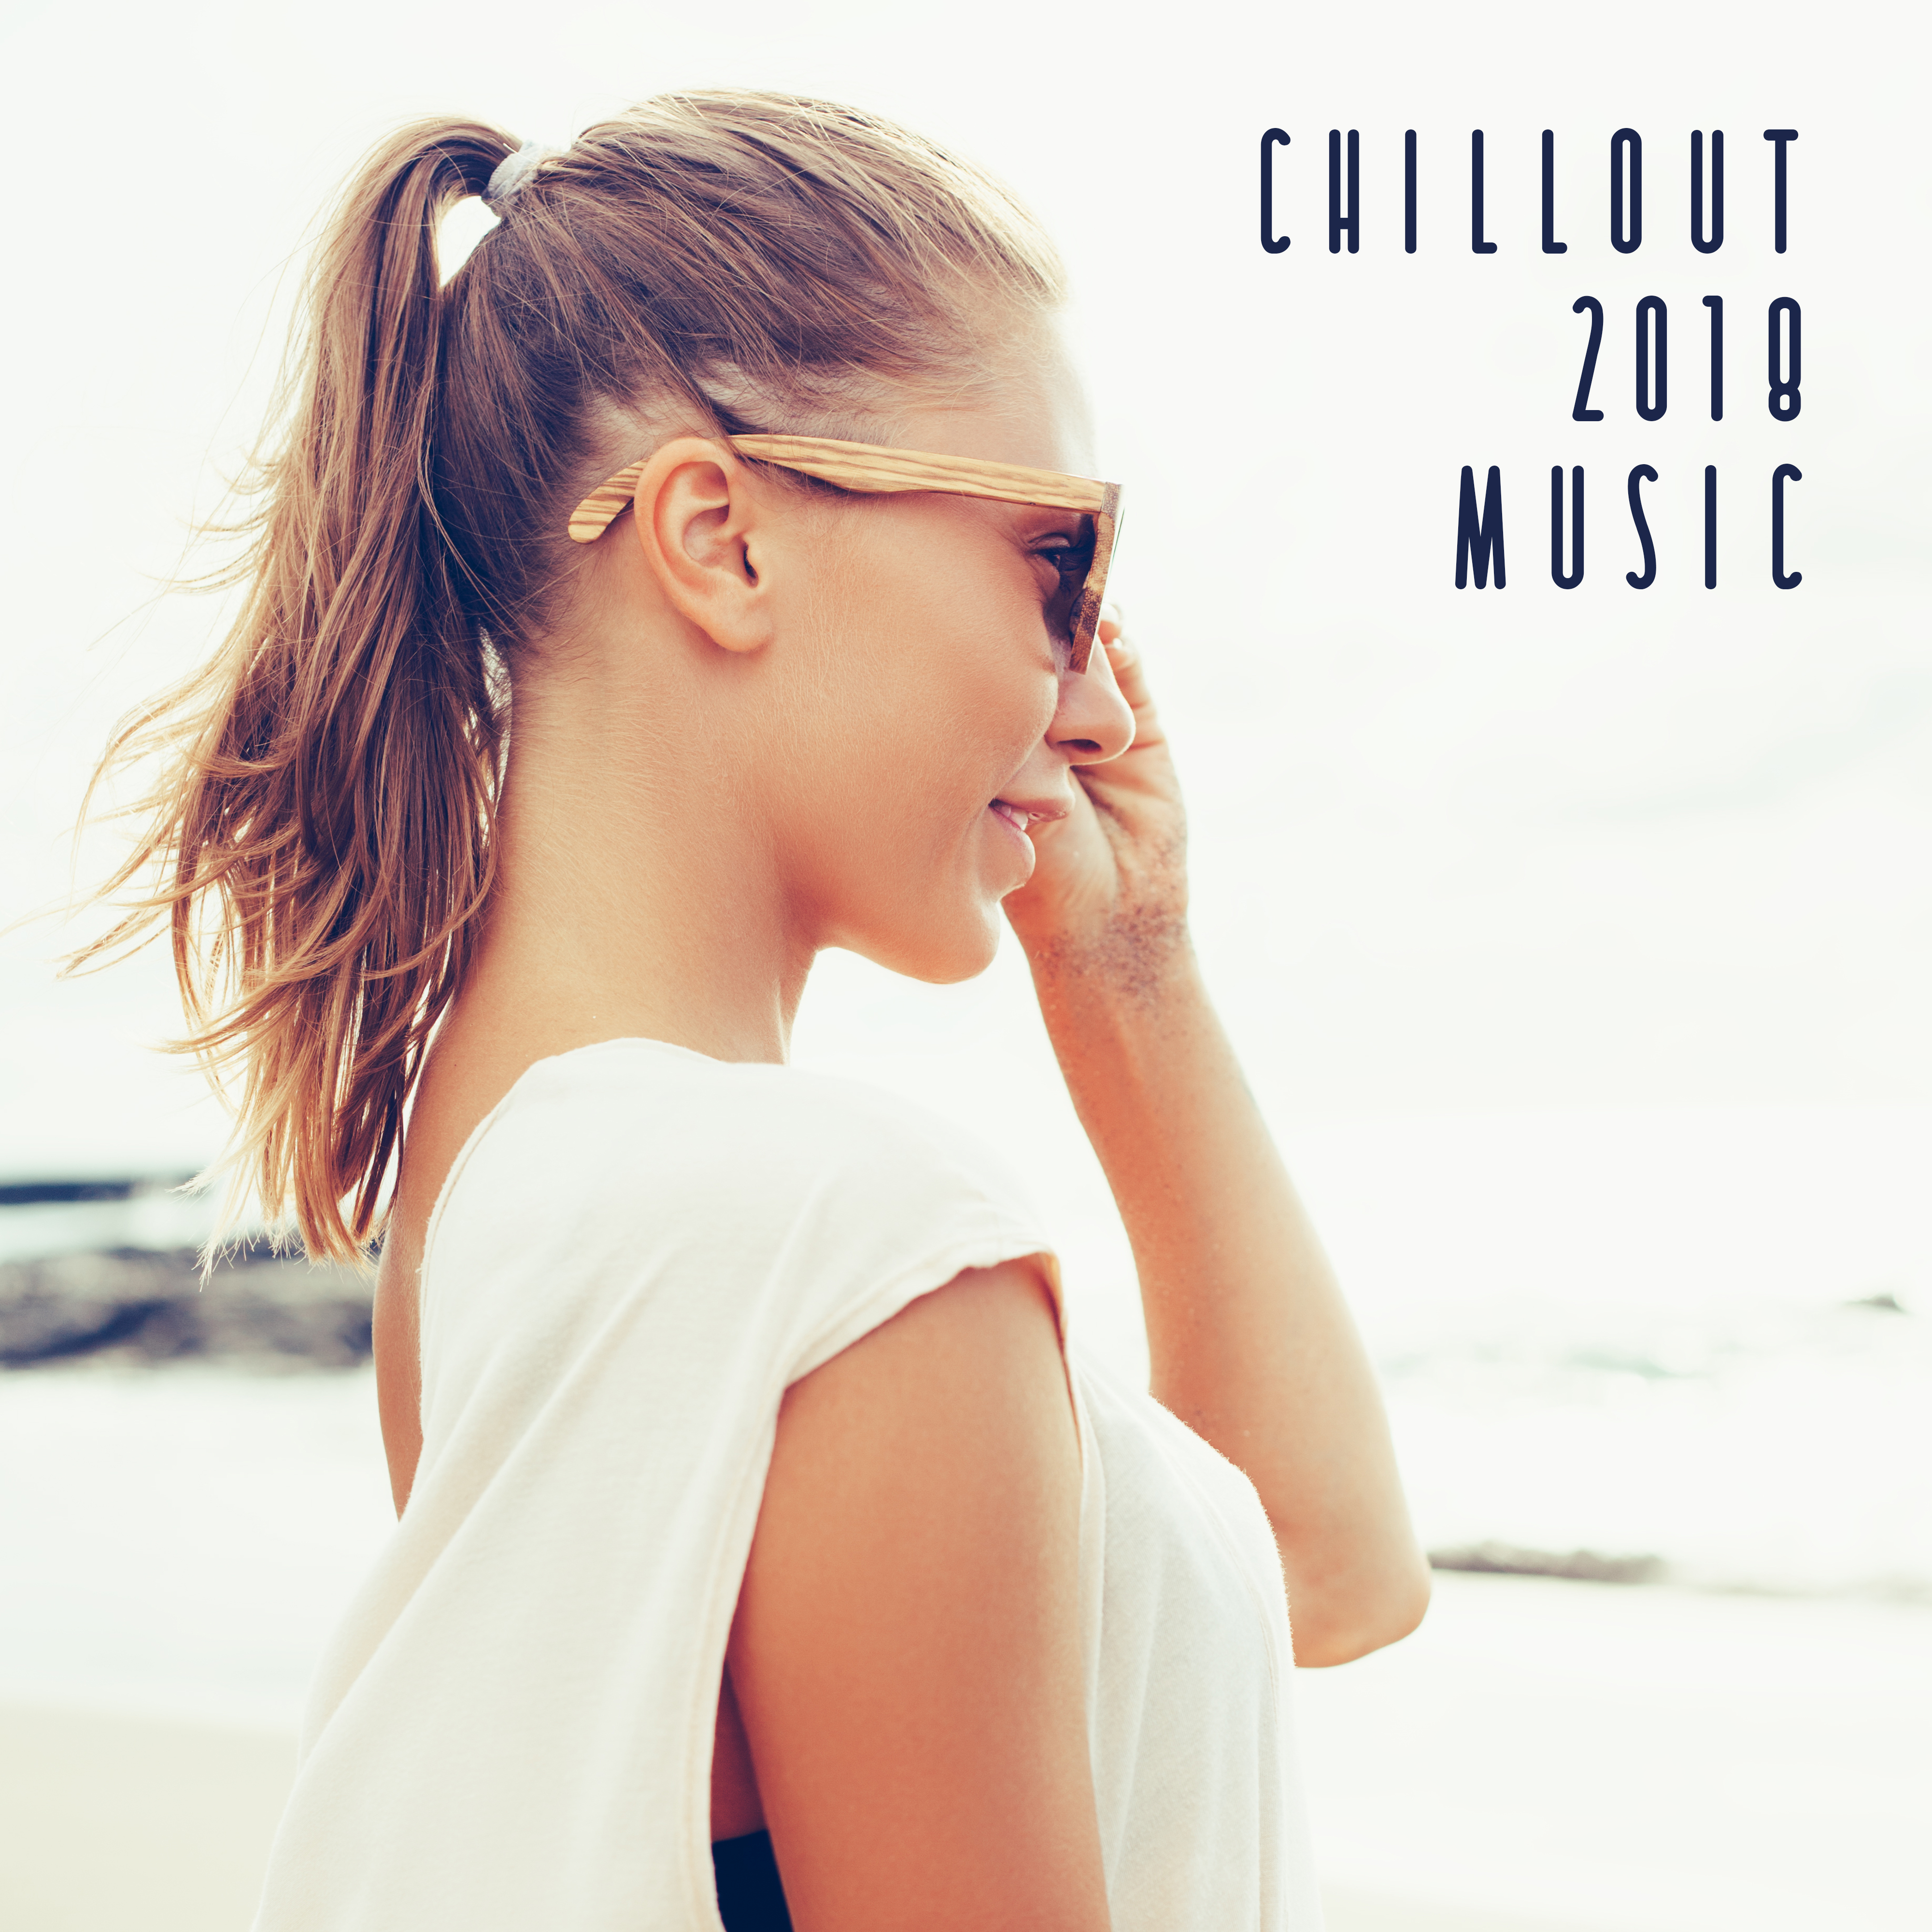 Chillout 2018